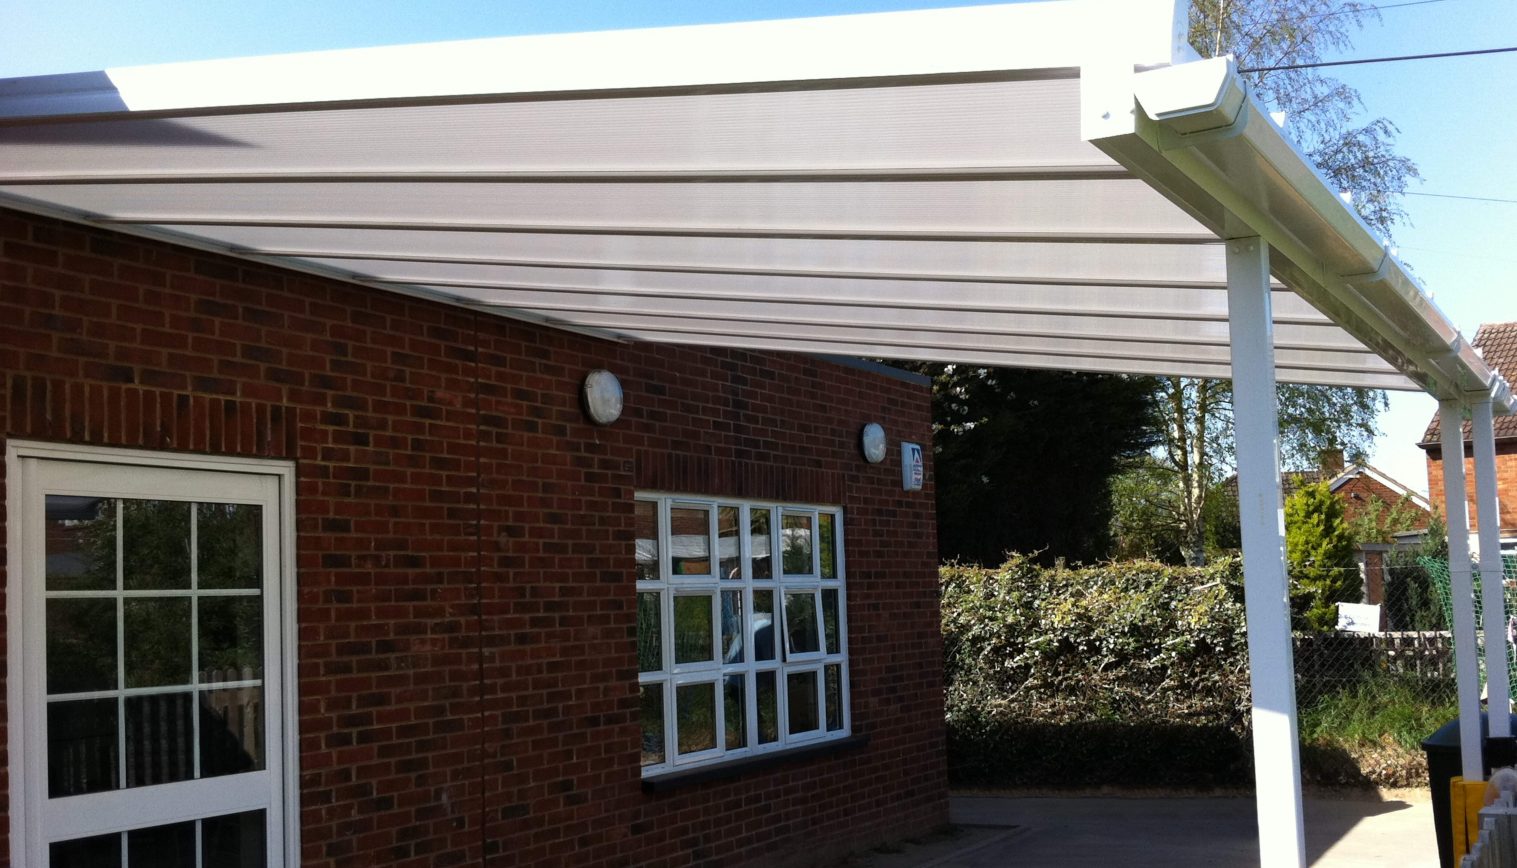 London Colney Childcare Centre- Wall Mounted Canopy